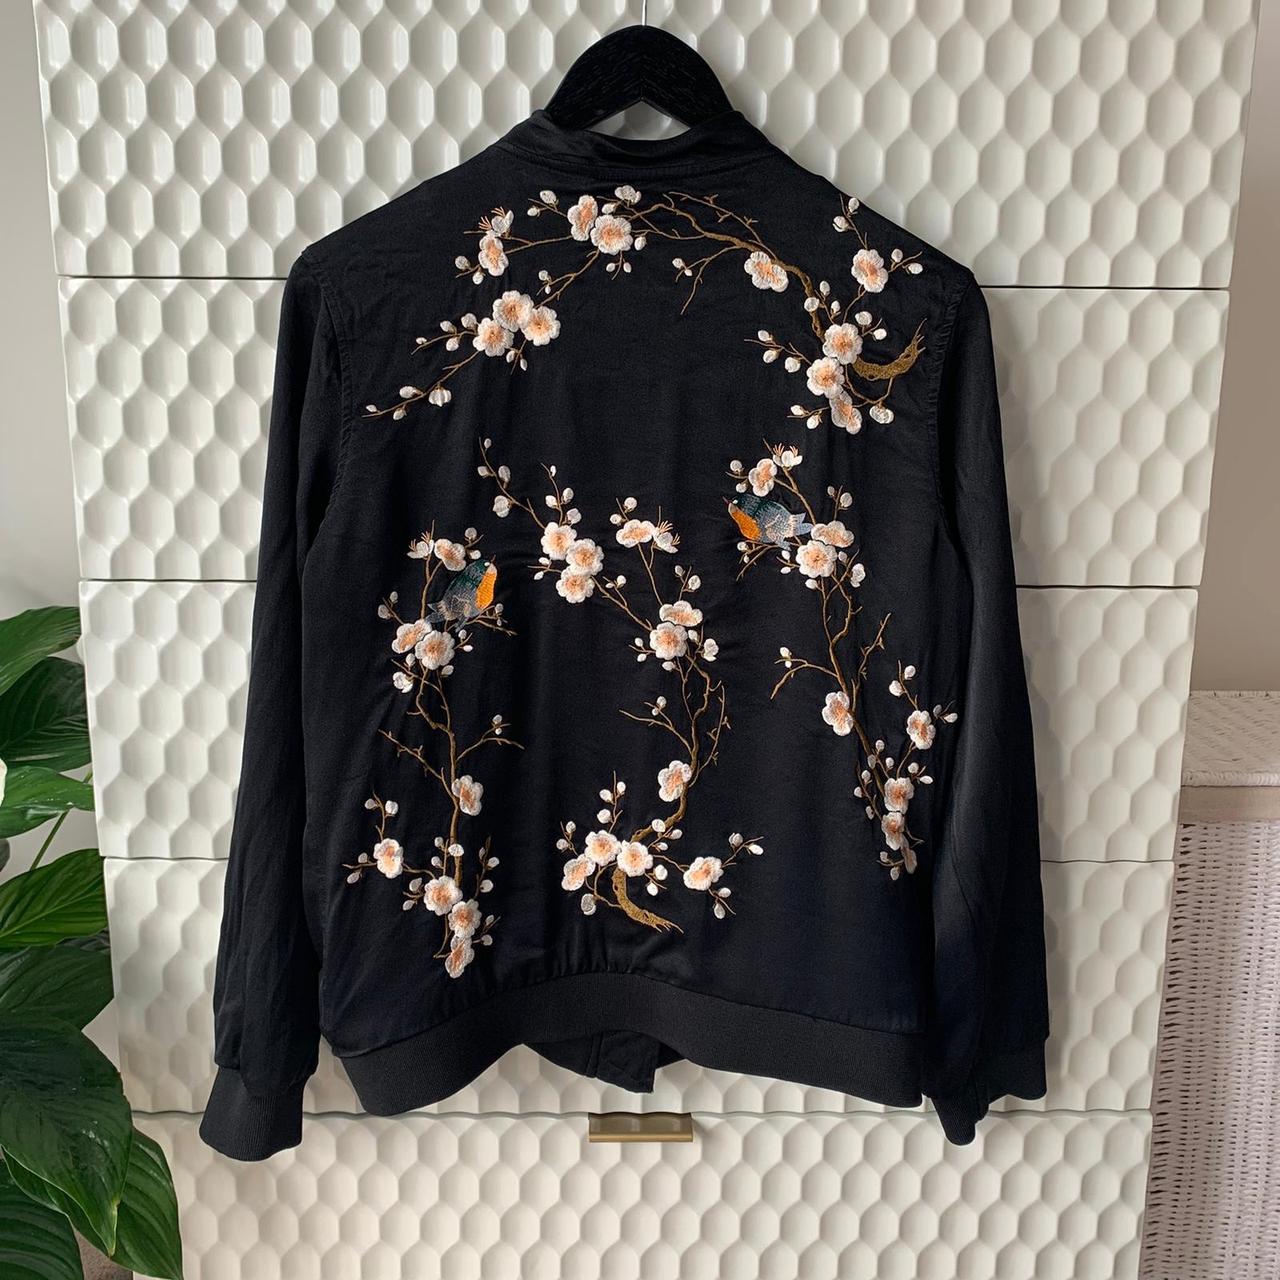 Zara embroidered bomber jacket, 🌸🕊🌼 beautiful floral...